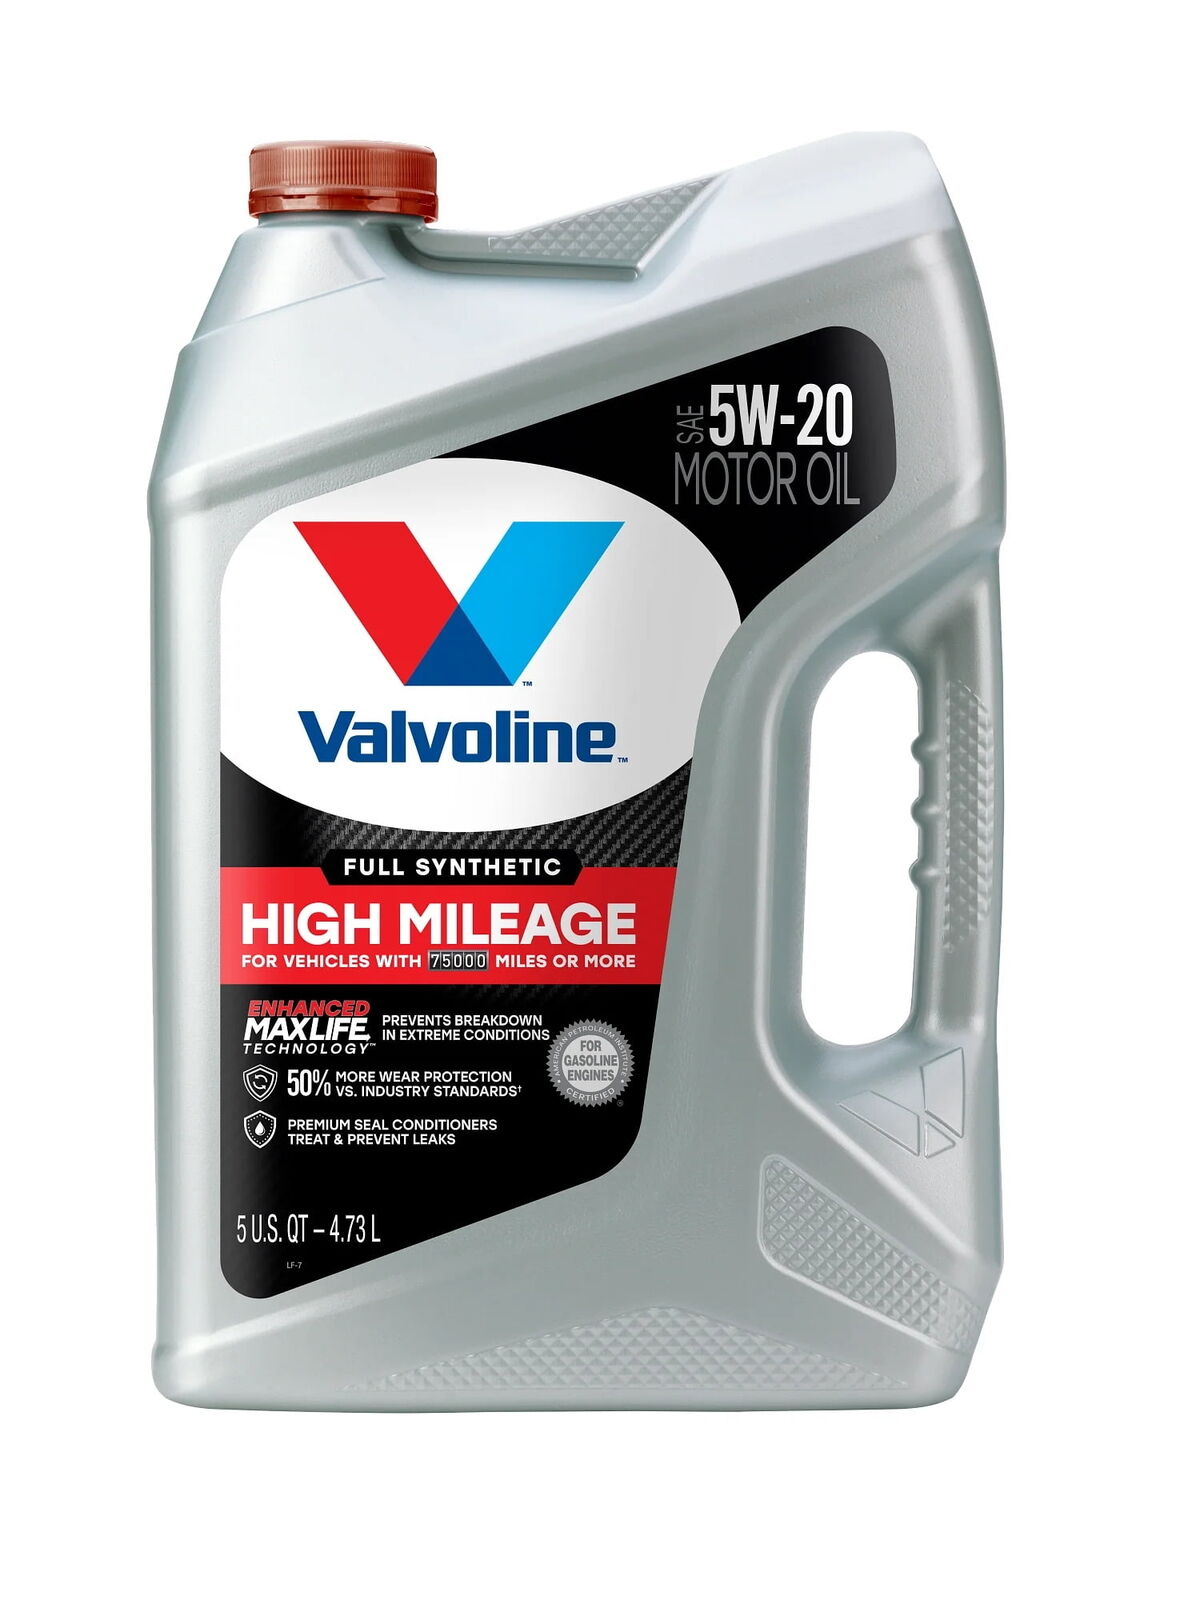 Valvoline Full Synthetic High Mileage with MaxLife Technology Motor Oil SAE5W-20